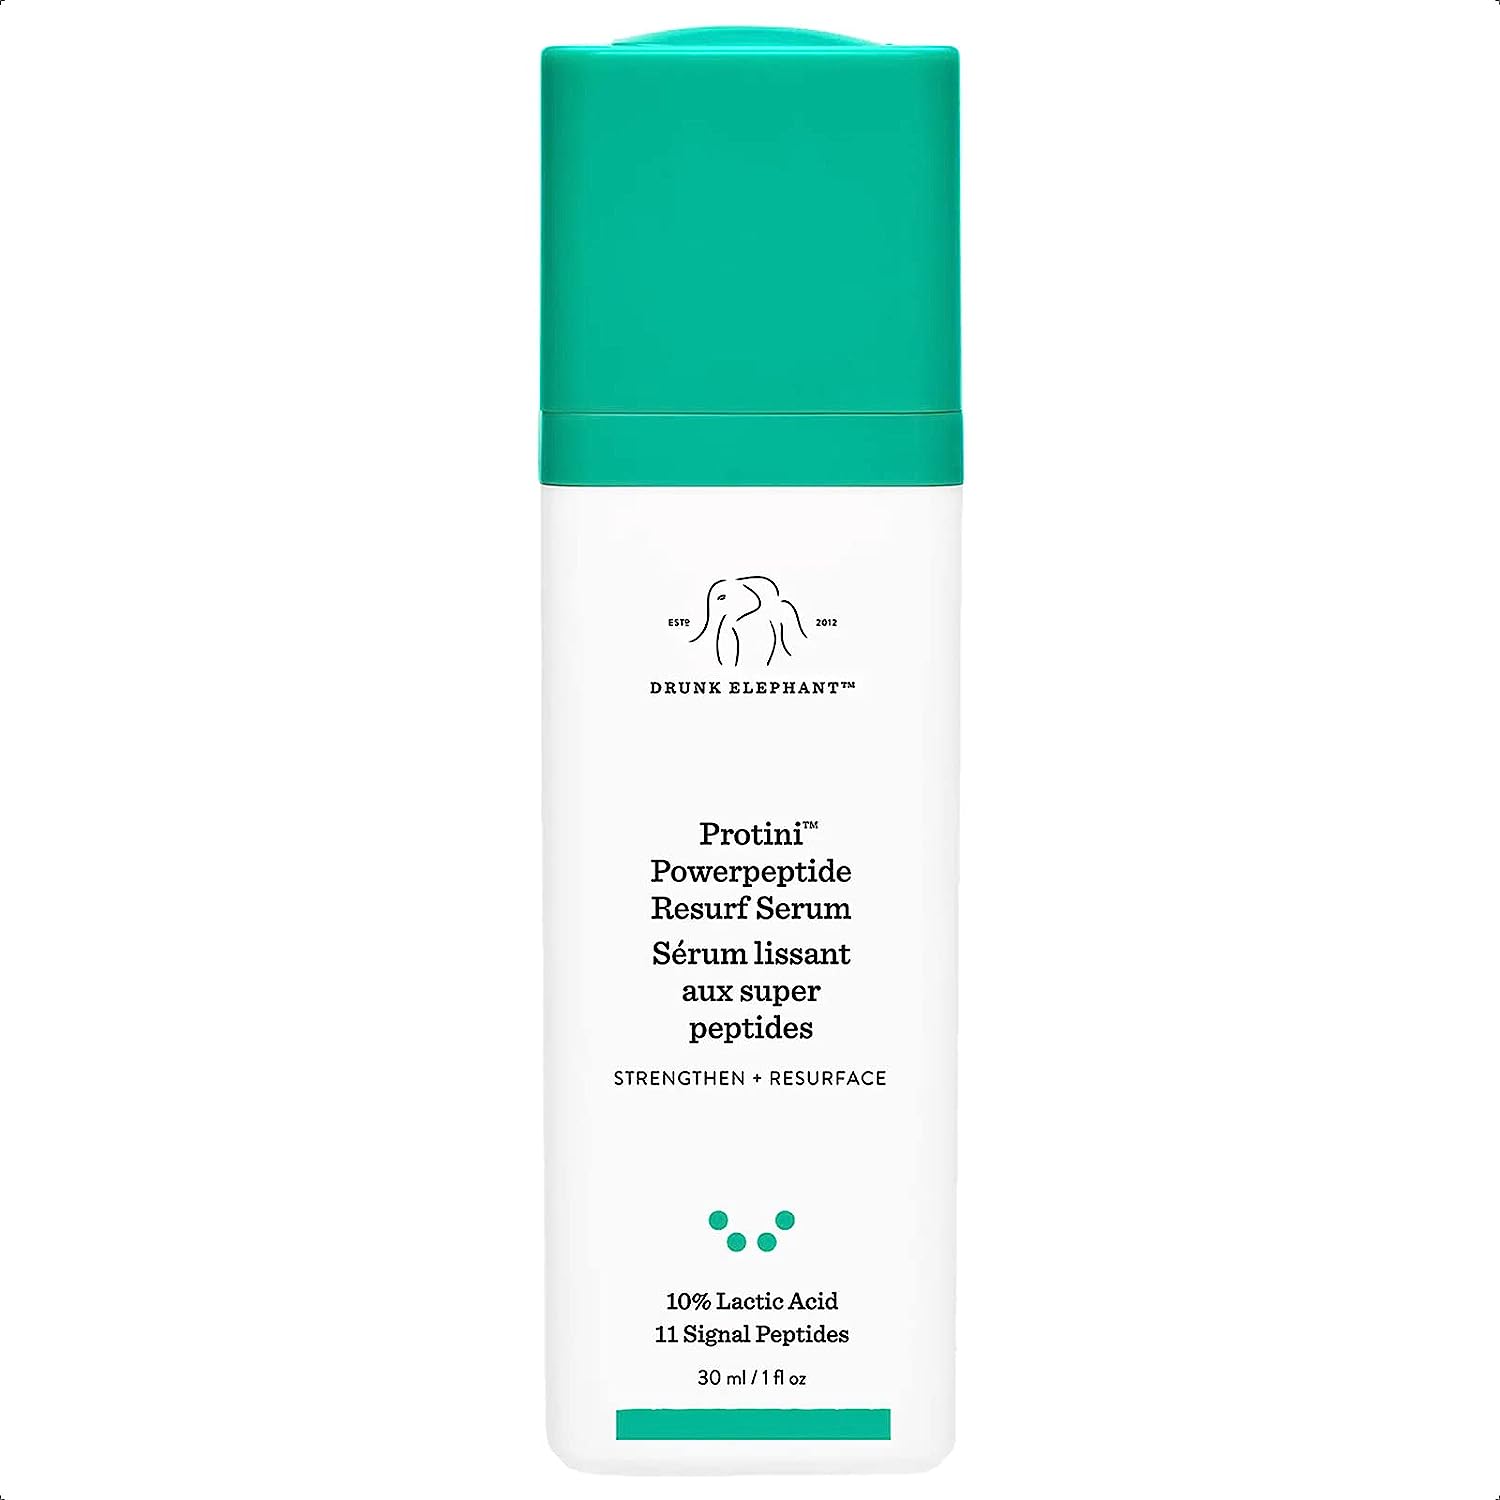 Drunk Elephant Protini Powerpeptide Resurf Serum. Strengthen and Resurface Face Serum with 10% Lactic Acid and 11 Signal Peptides (30 Ml / 1 Fl Oz)